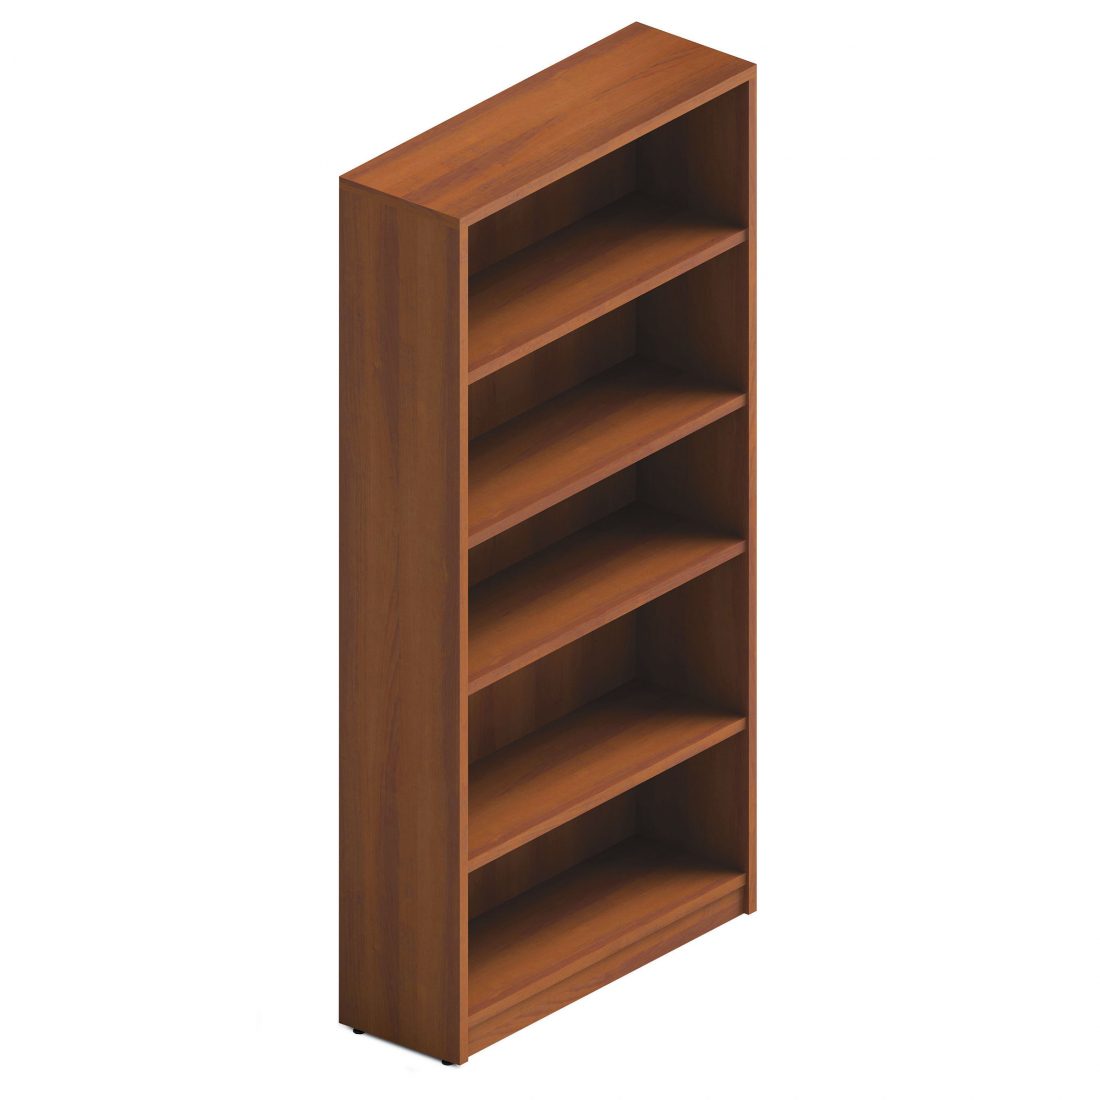 Global Laminate Bookcases Rcs Innovations, Wood Laminate Bookcases